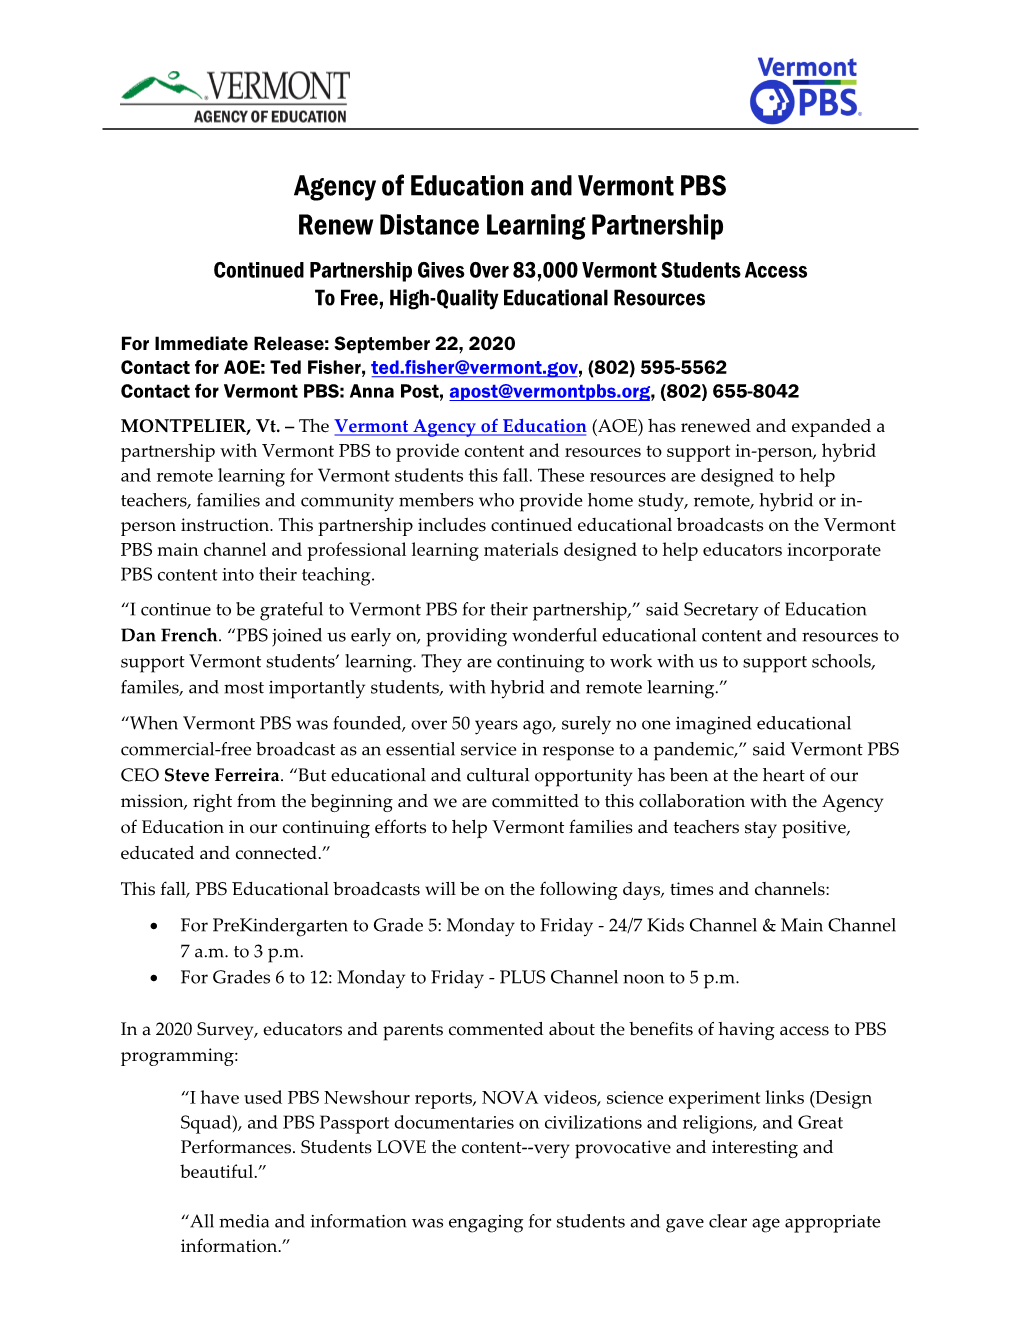 PRESS RELEASE: AOE and Vermont PBS Renew Distance Learning